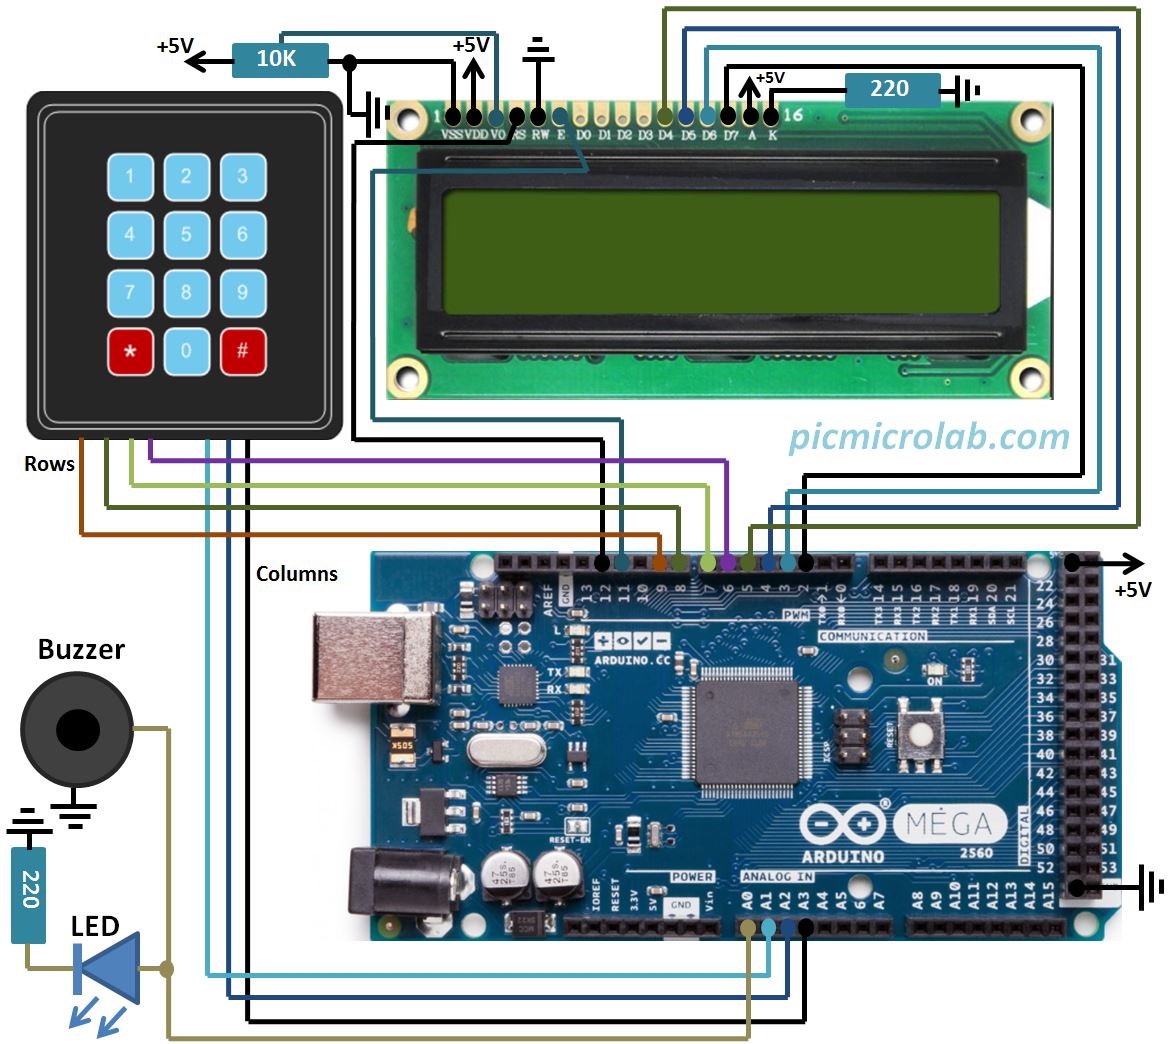 https://www.picmicrolab.com/wp-content/uploads/2017/10/LCD-Countdown-Timer-Arduino-Schematic.jpg